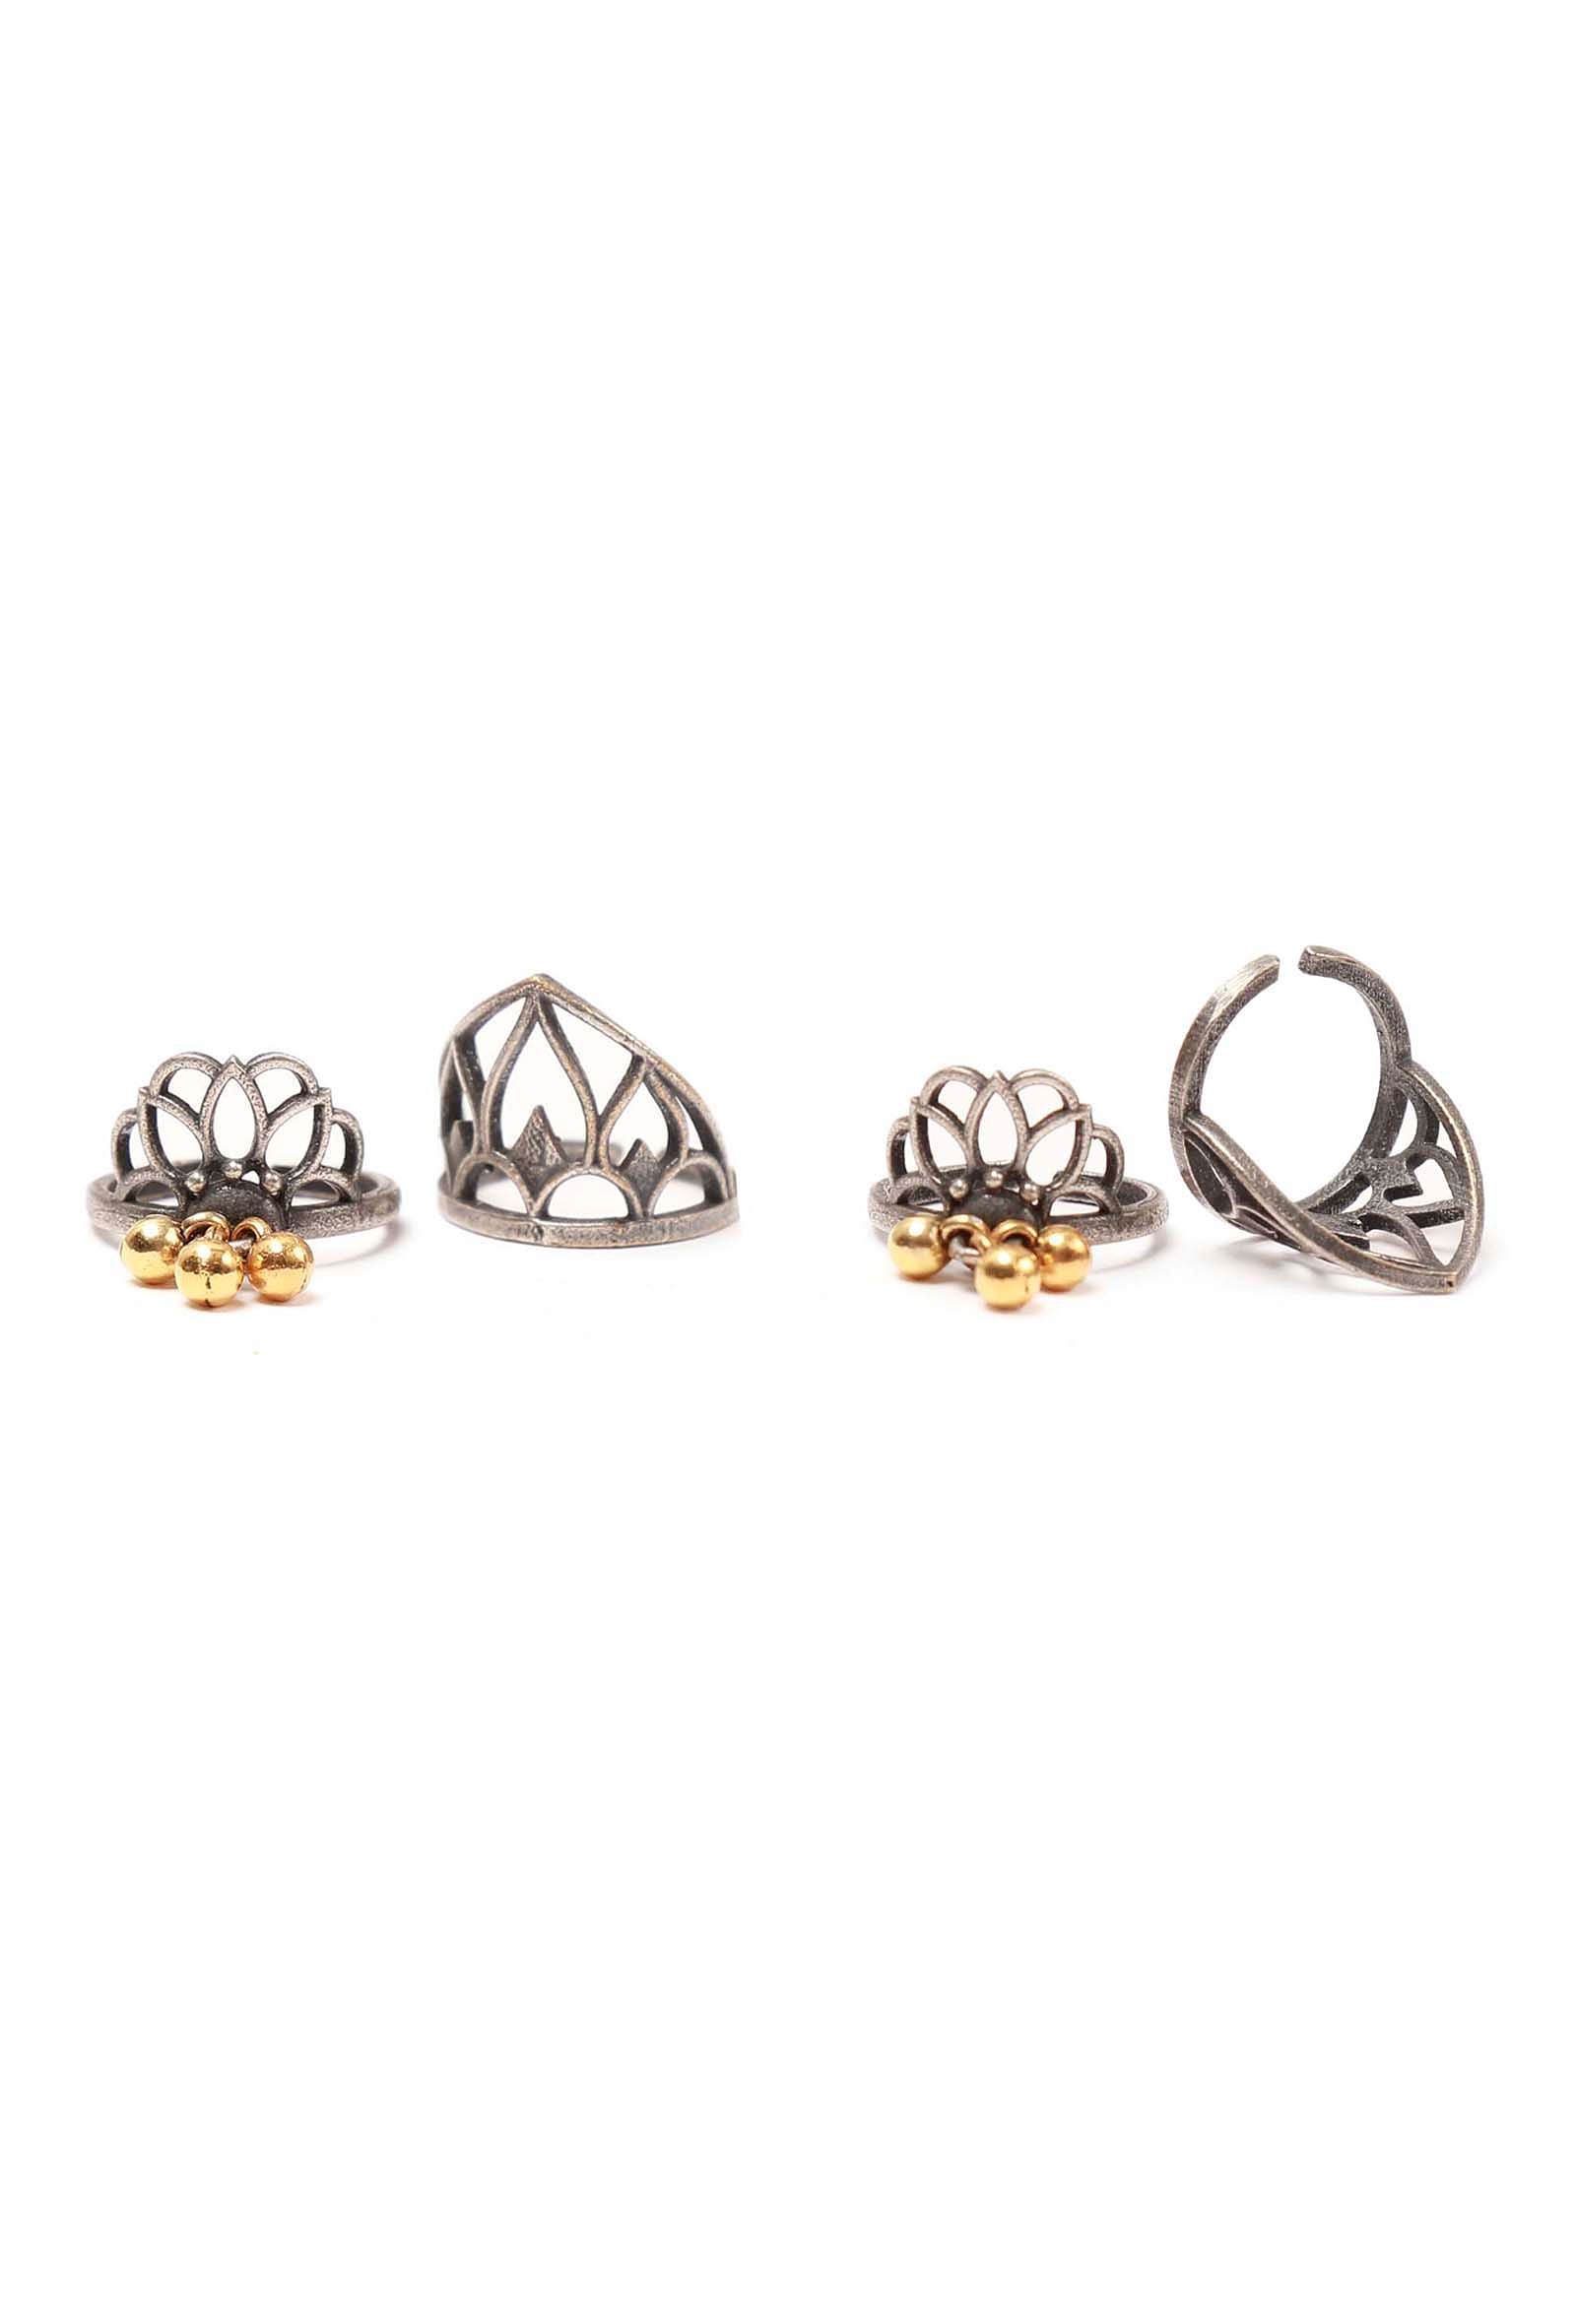 Set of 4: Temple Floral Silver Brass Toering